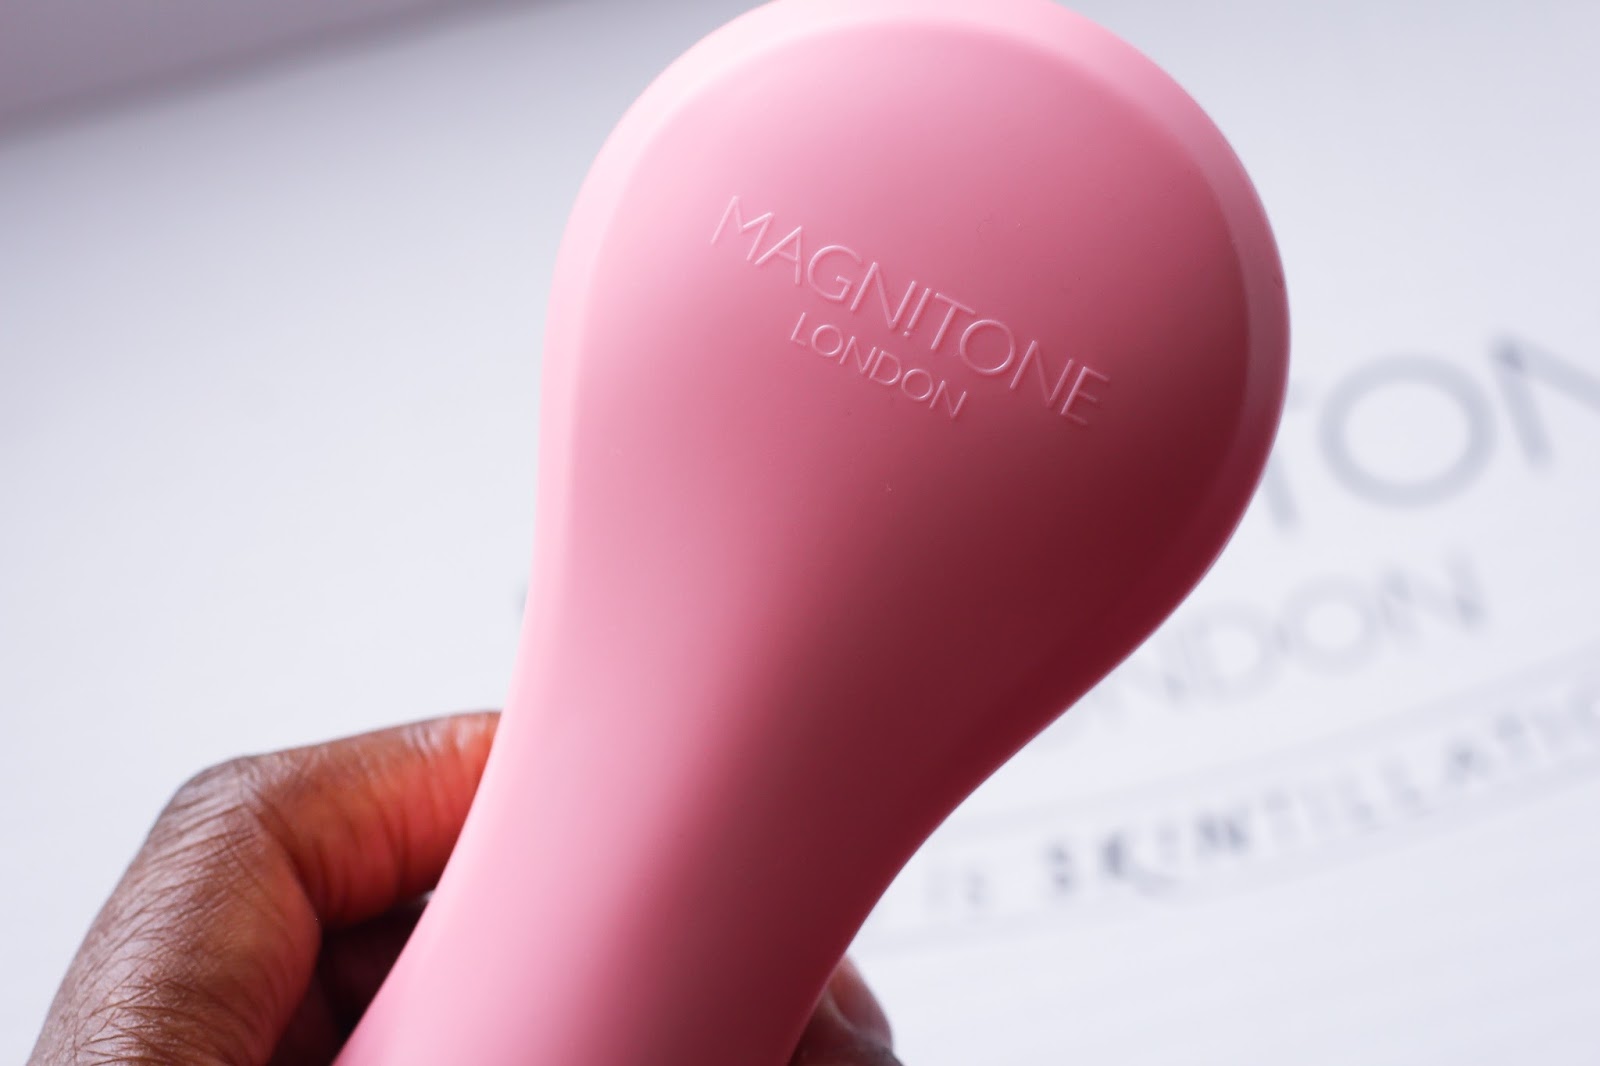 Magnitone BareFaced VibraSonic Cleansing Face Brush, Magnitone Barefaced, Magnitone, Facial Cleansing Brush, Sonic Cleansing